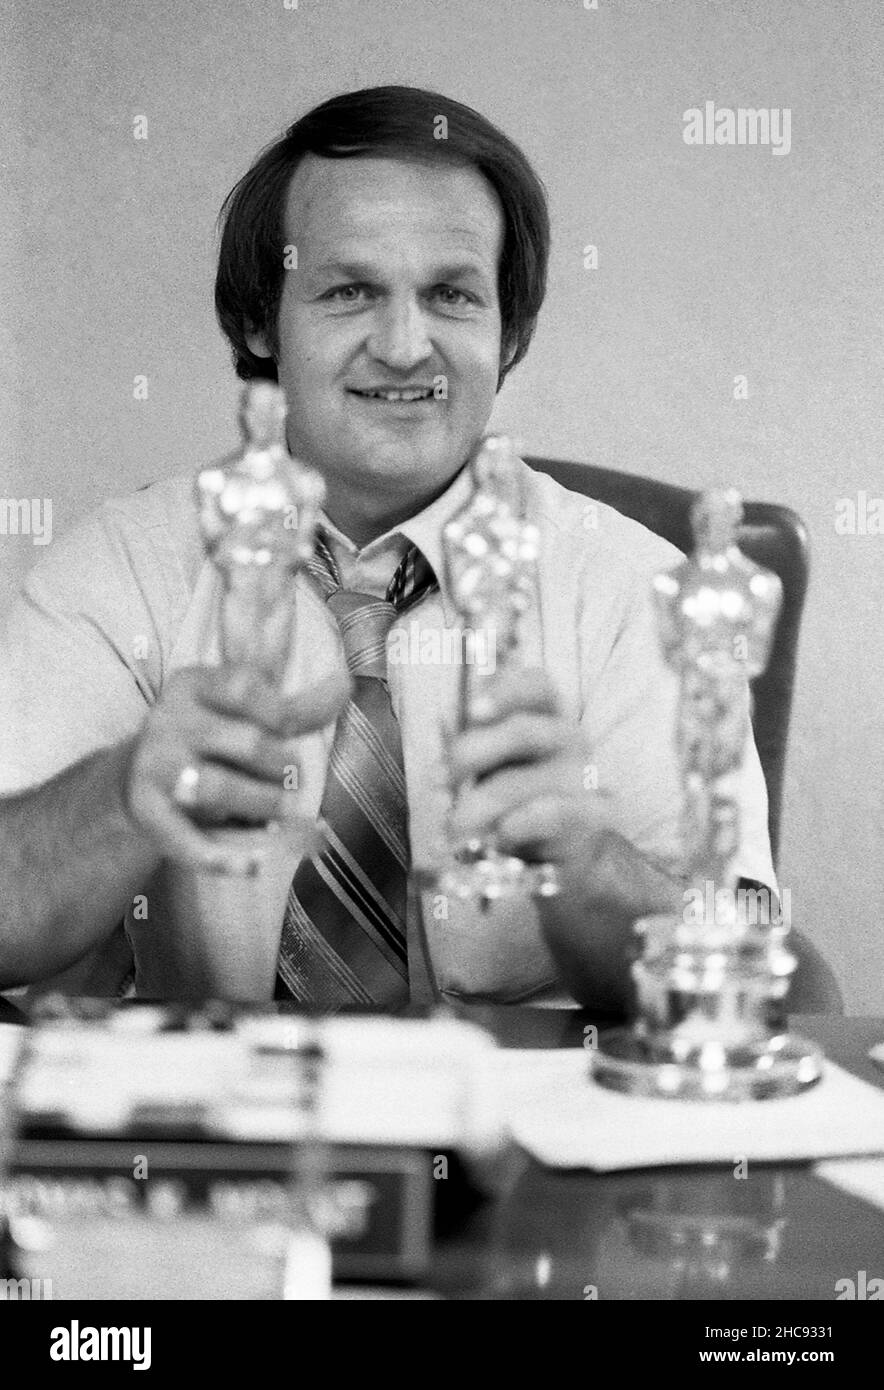 Thomas K Mount director of the company that makes the Oscar statuettes at the famous film award Stock Photo